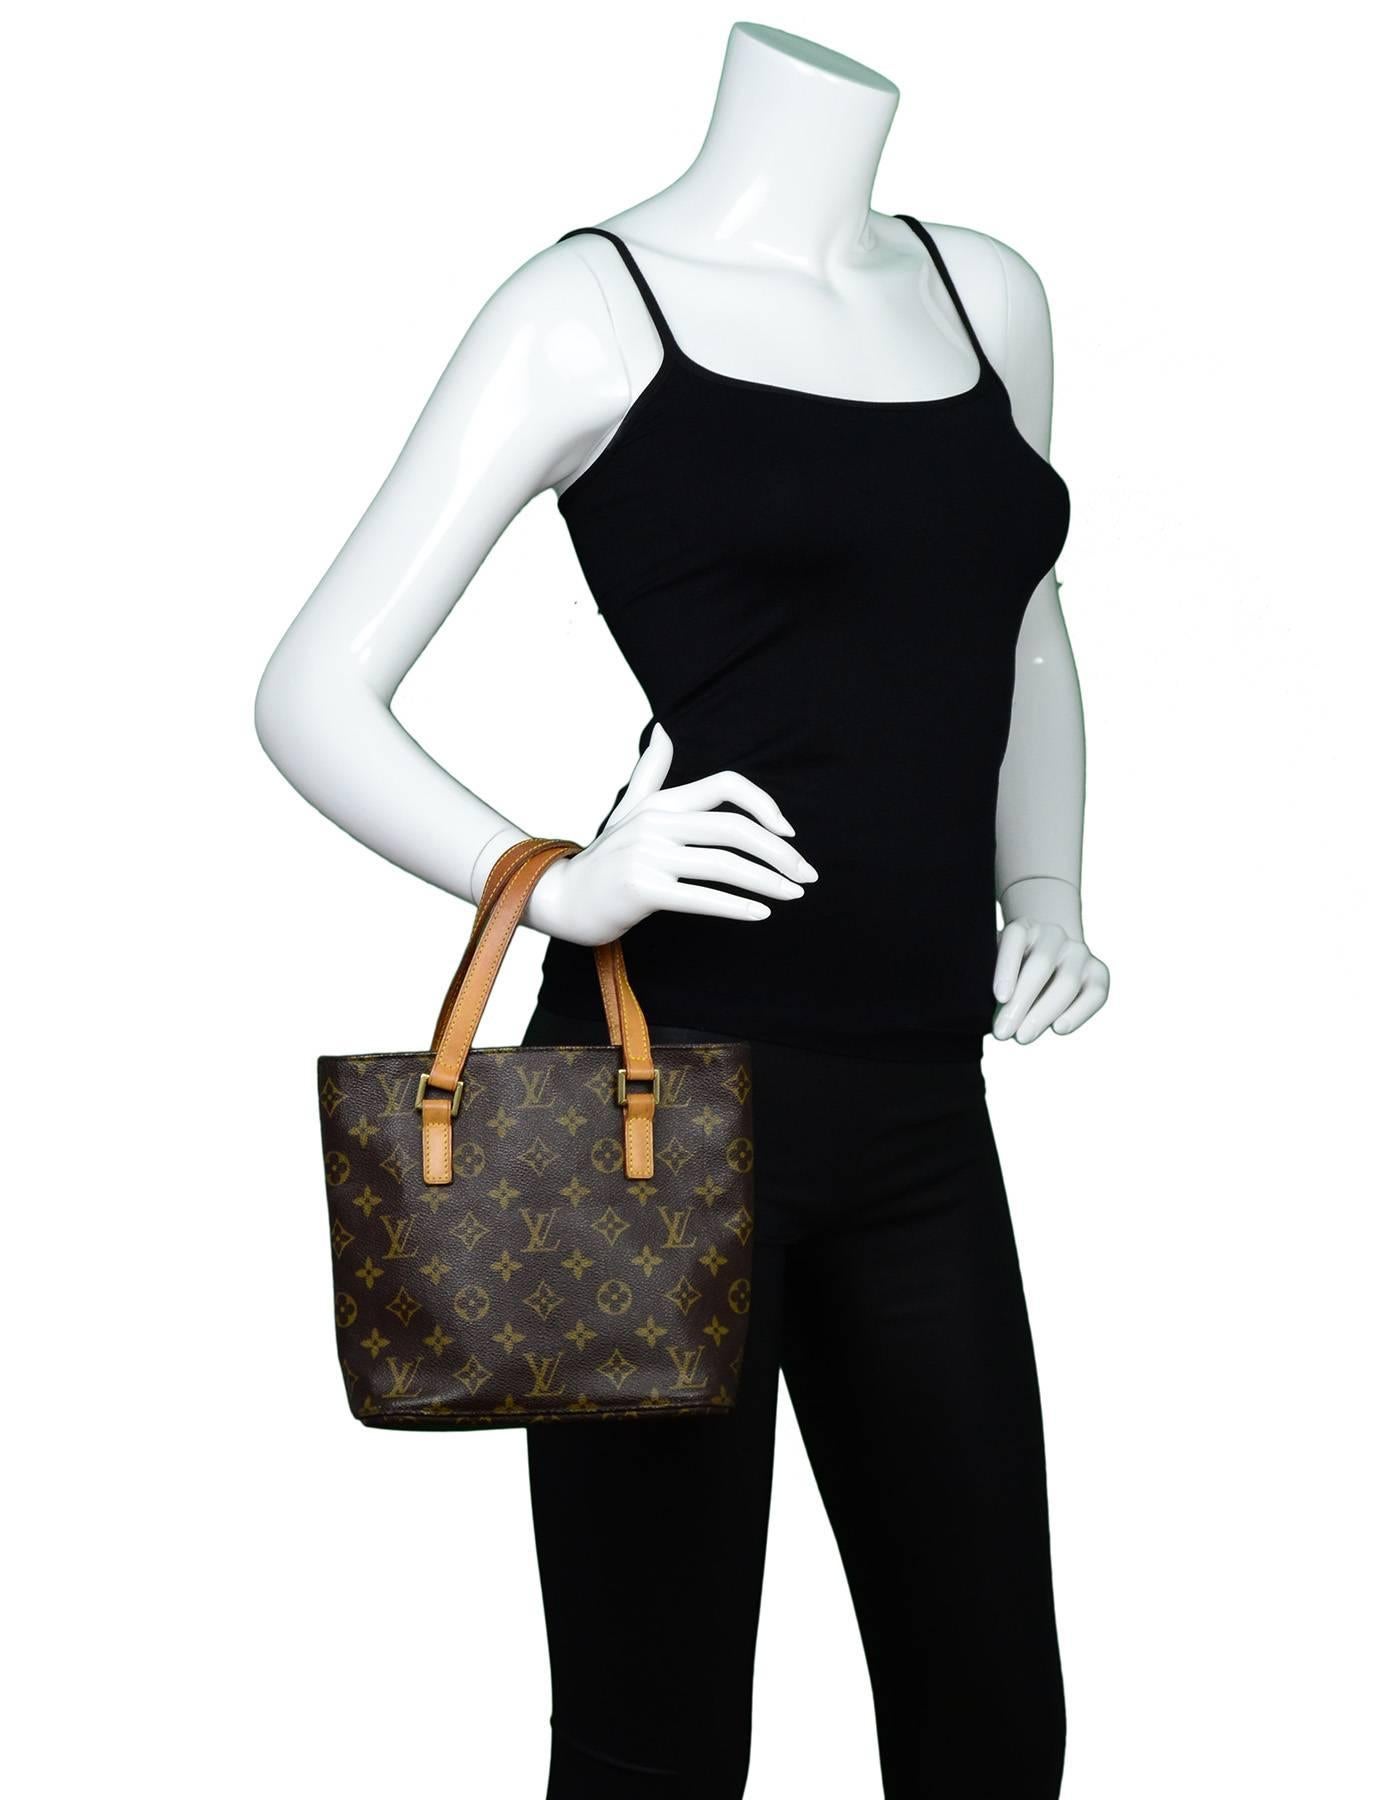 Louis Vuitton Monogram Vavin PM Tote Bag

Made In: U.S.A.
Year of Production: 2001
Color: Brown
Hardware: Goldtone
Materials: Coated canvas and vachetta leather
Lining: Brown canvas
Closure/Opening: None
Exterior Pockets: None
Interior Pockets: Two